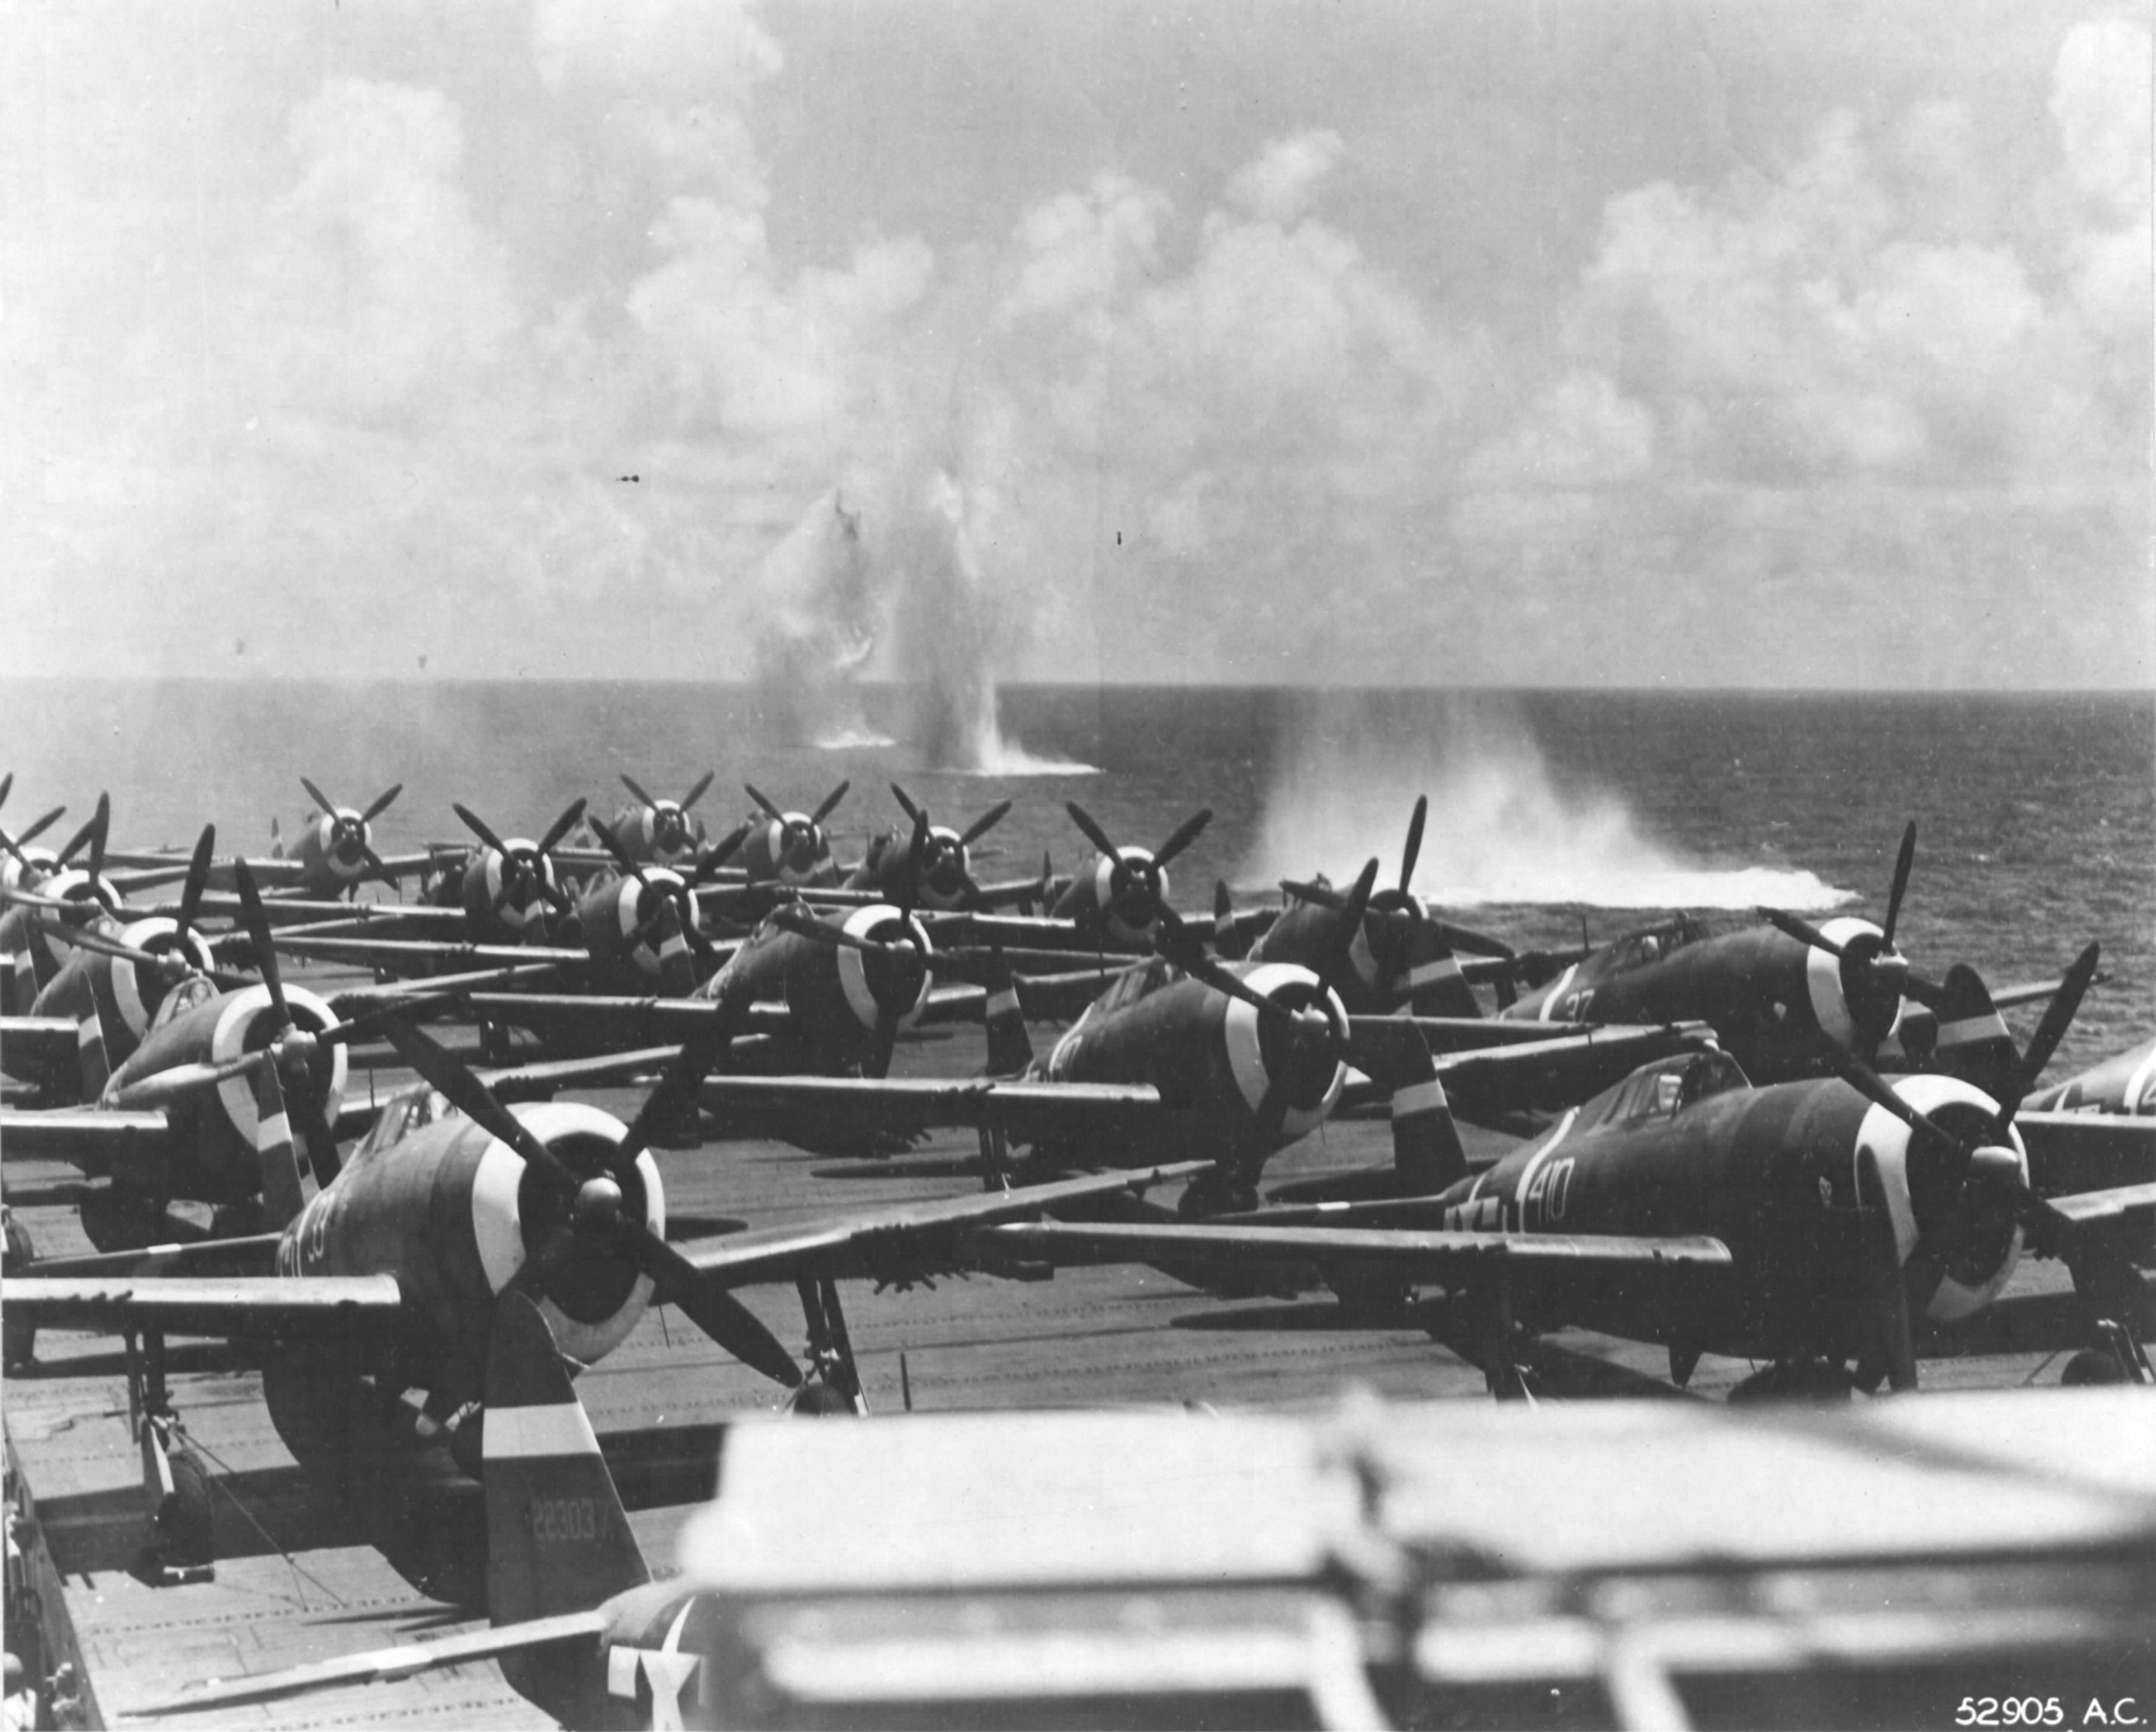 P-47D Thunderbolts of the 318th Fighter Group being ferried to Saipan on Escort Carrier USS Manila Bay. Note bomb splashes from an aerial attack by four D3A Aichi “Val” dive bombers during refueling operations east of Saipan, Jun 23 1944. Photo 1 of 2